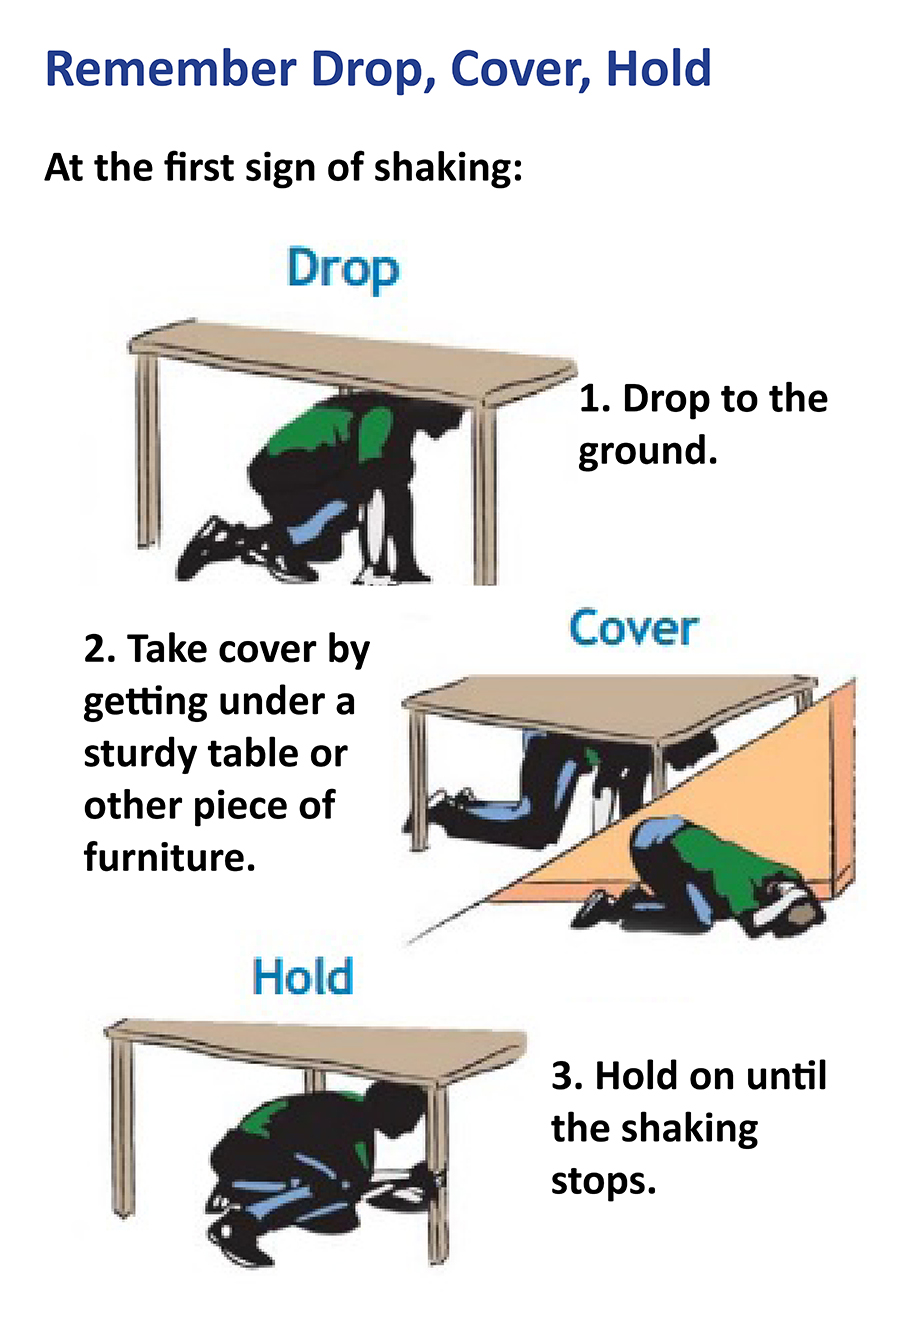 In the event of an earthquake, remember to drop to the ground, take cover under a sturdy table or piece of furniture, and hold on until the shaking stops.